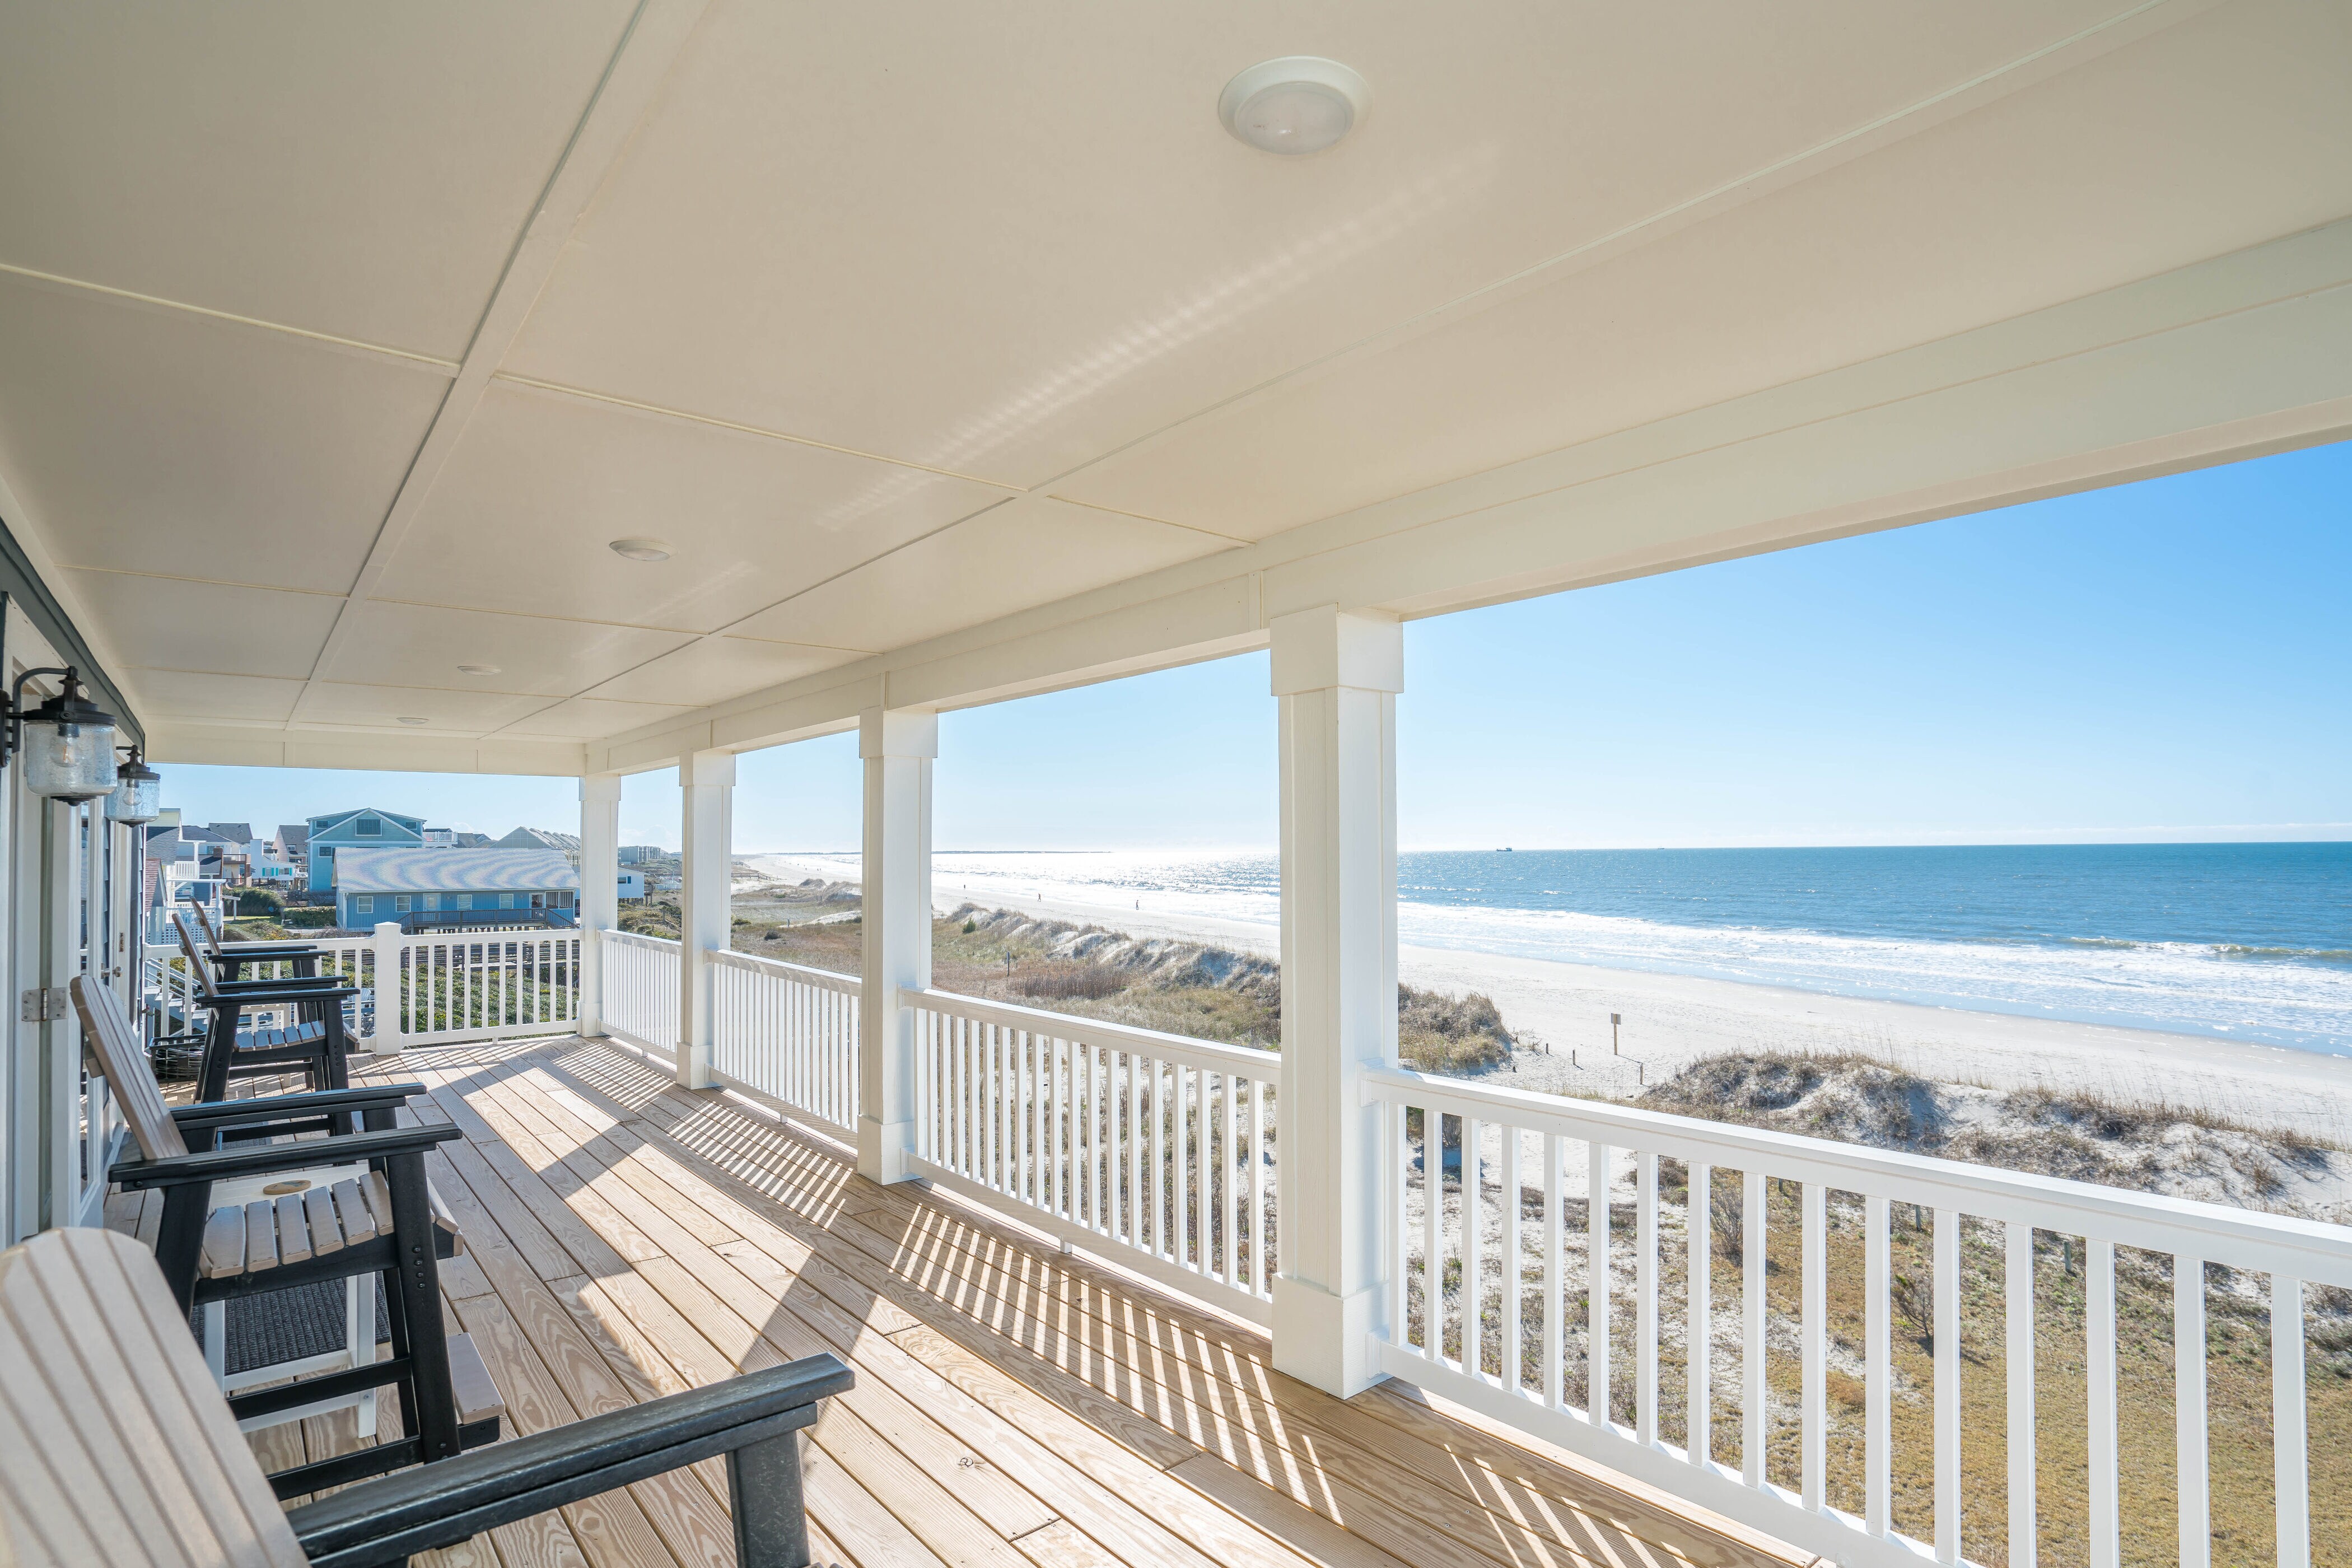 Property Image 2 - NEW! Oceanfront w/ Direct Access to Beach & View of Pier.  The Seventh Wave